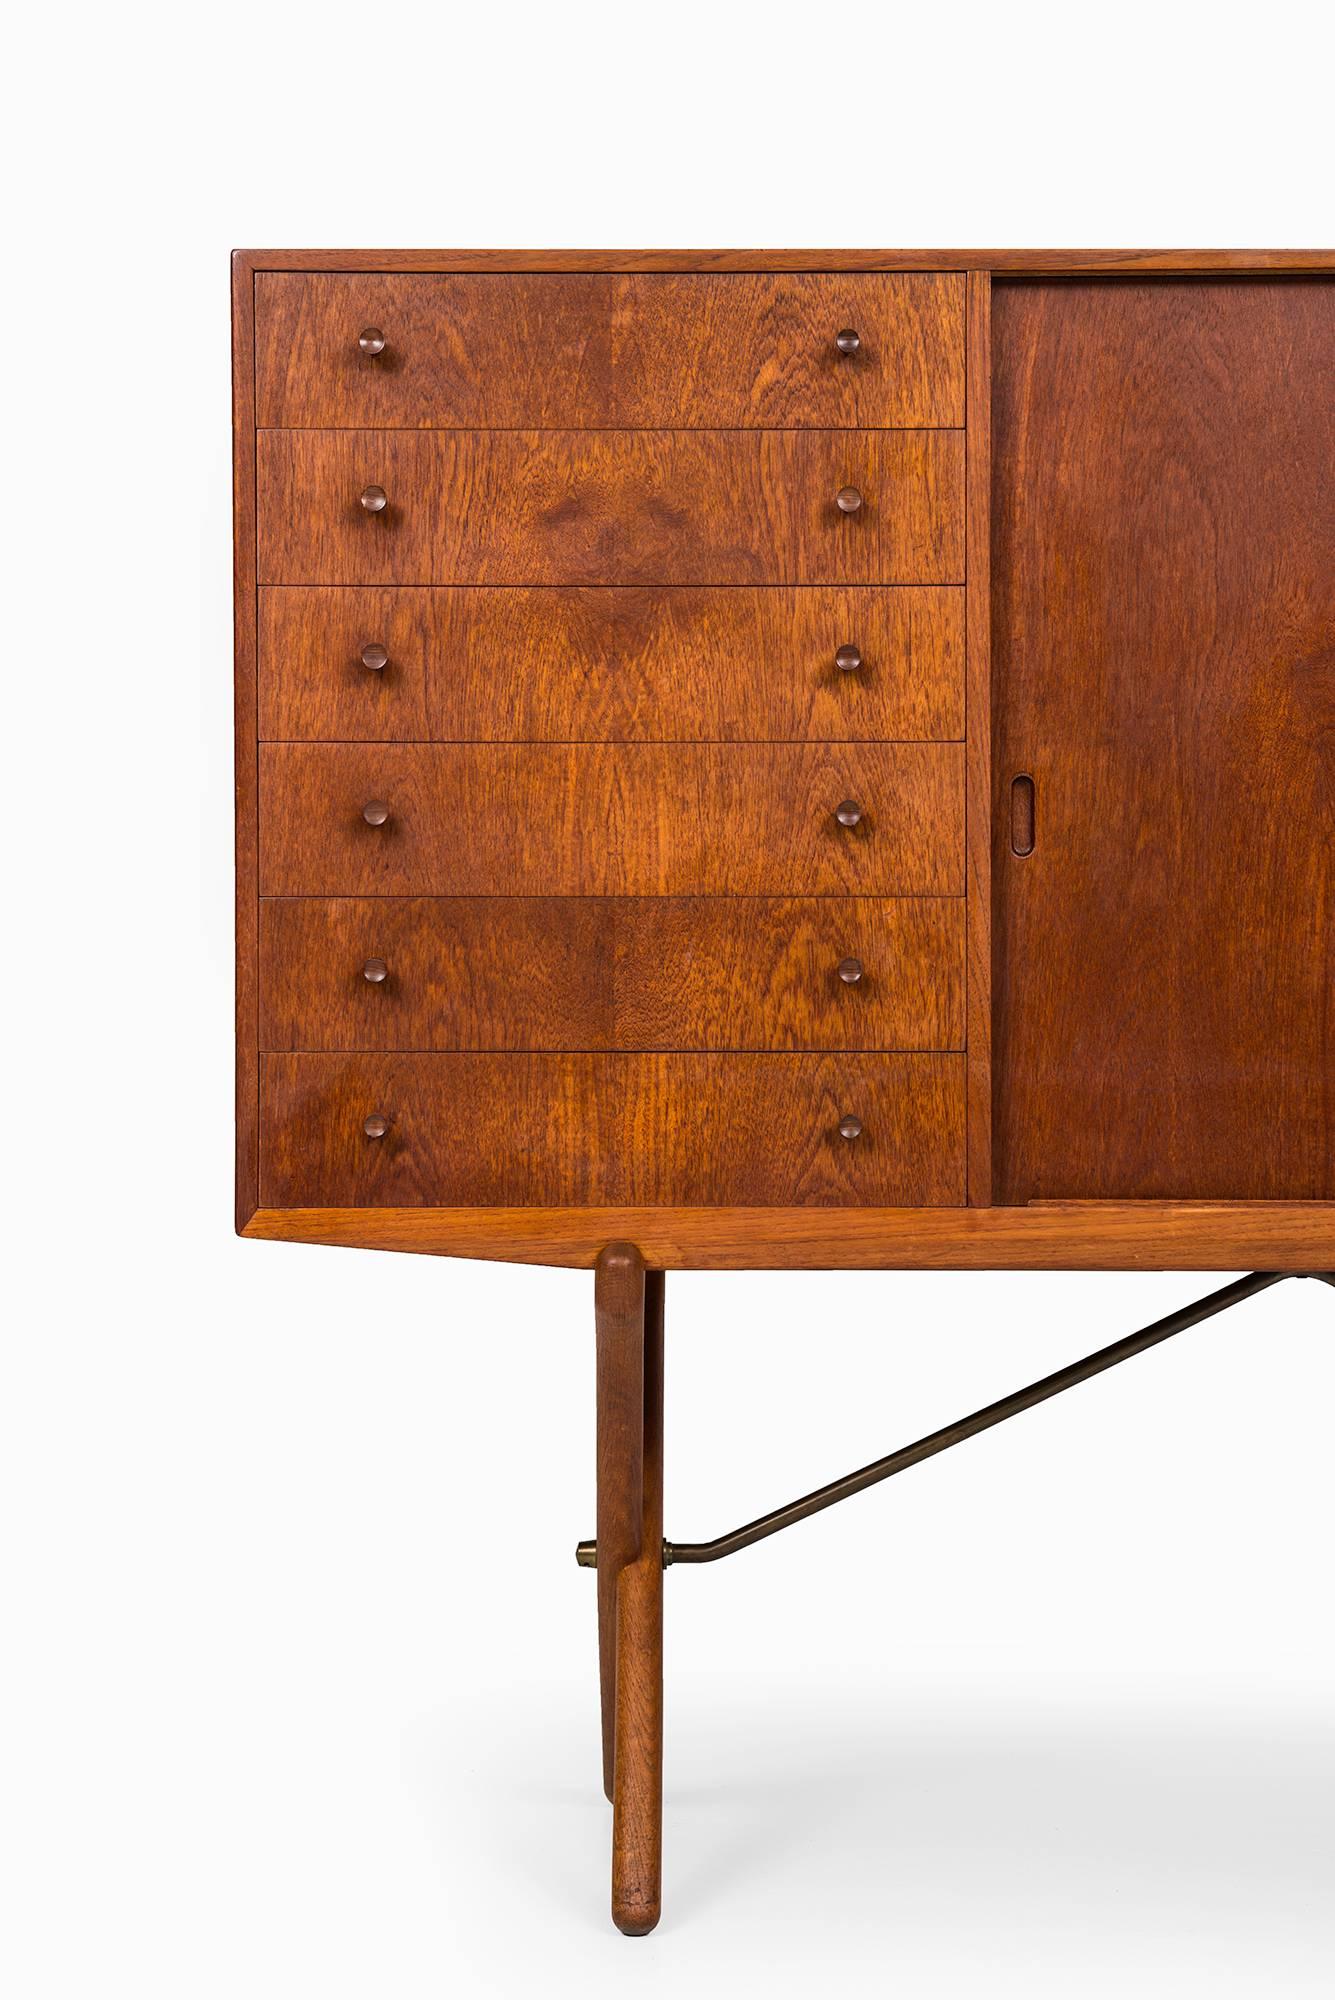 Danish Rare Sideboard Designed by Hans Wegner and Produced by Andreas Tuck in Denmark